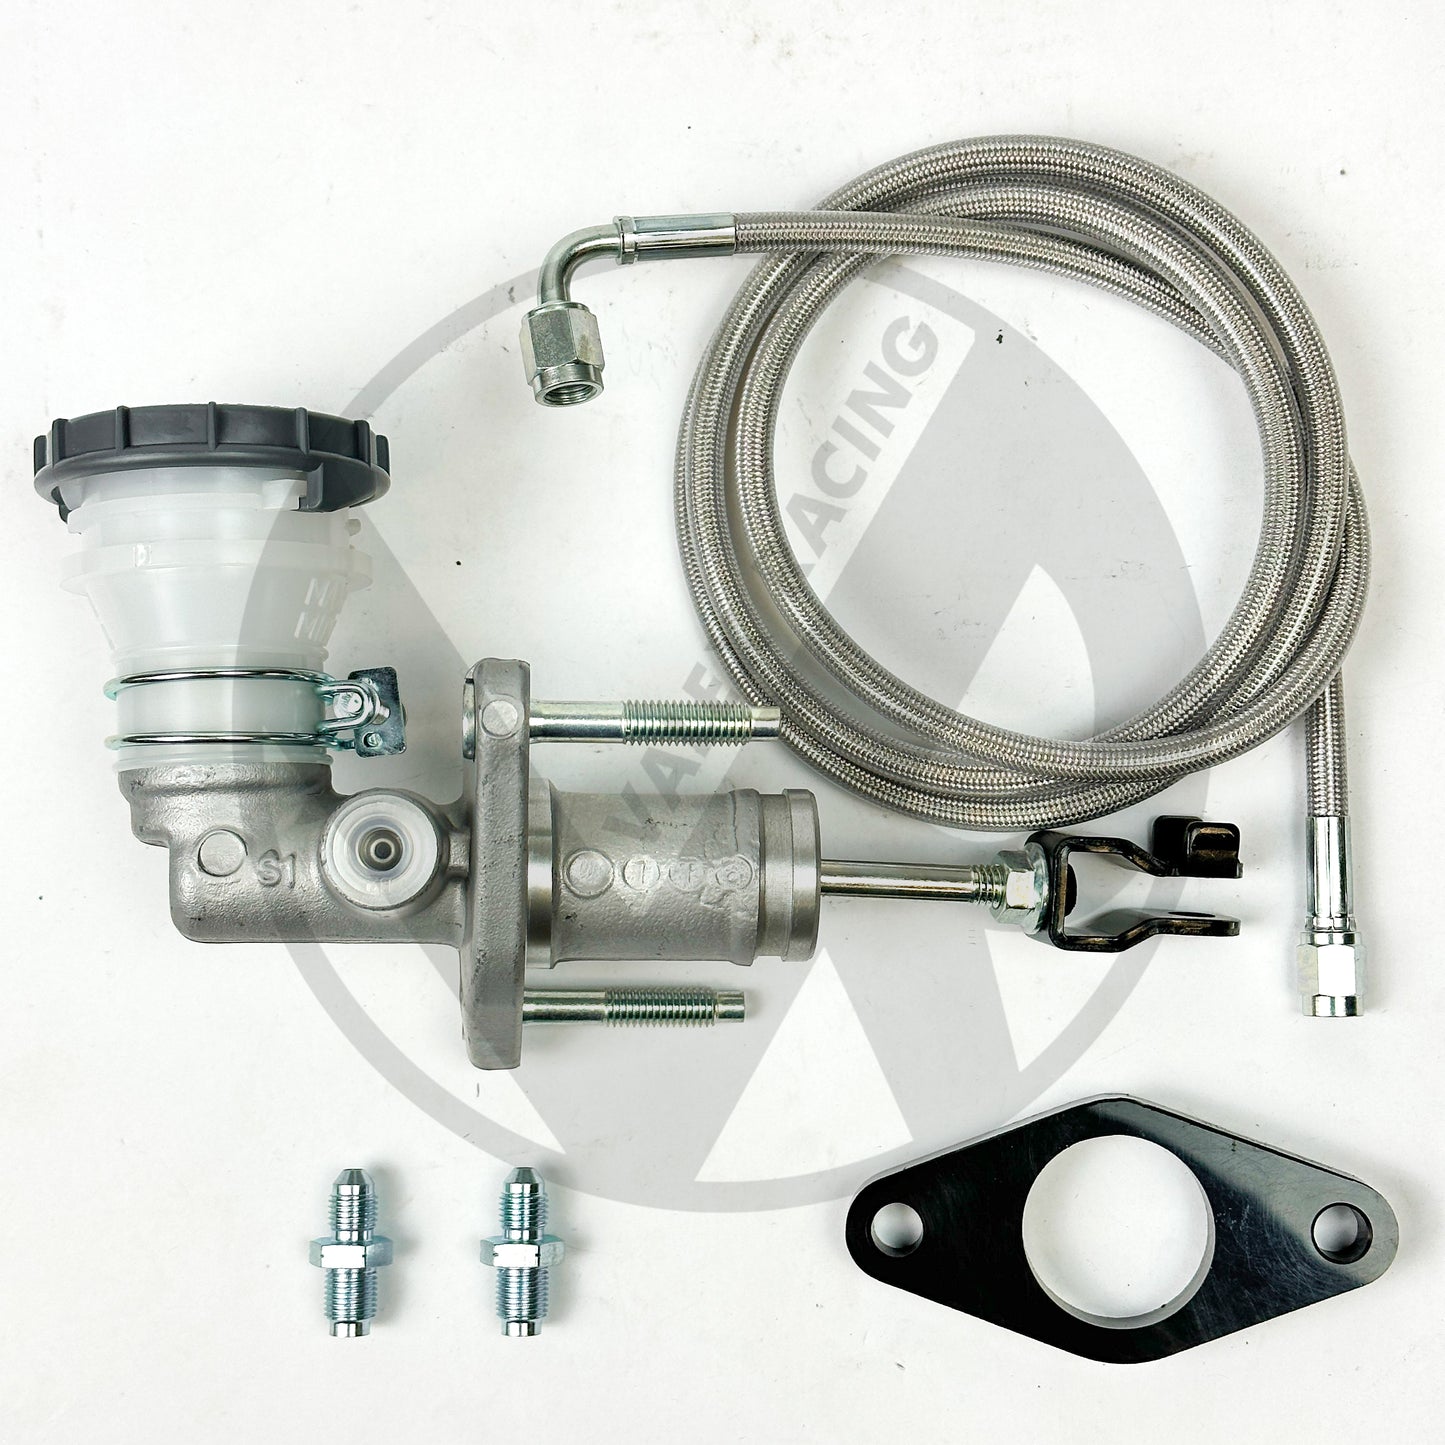 OEM S2000 (S2K) Clutch Master Cylinder (CMC) Kit with Adapter and Stainless Steel Clutch Line EG EK DC